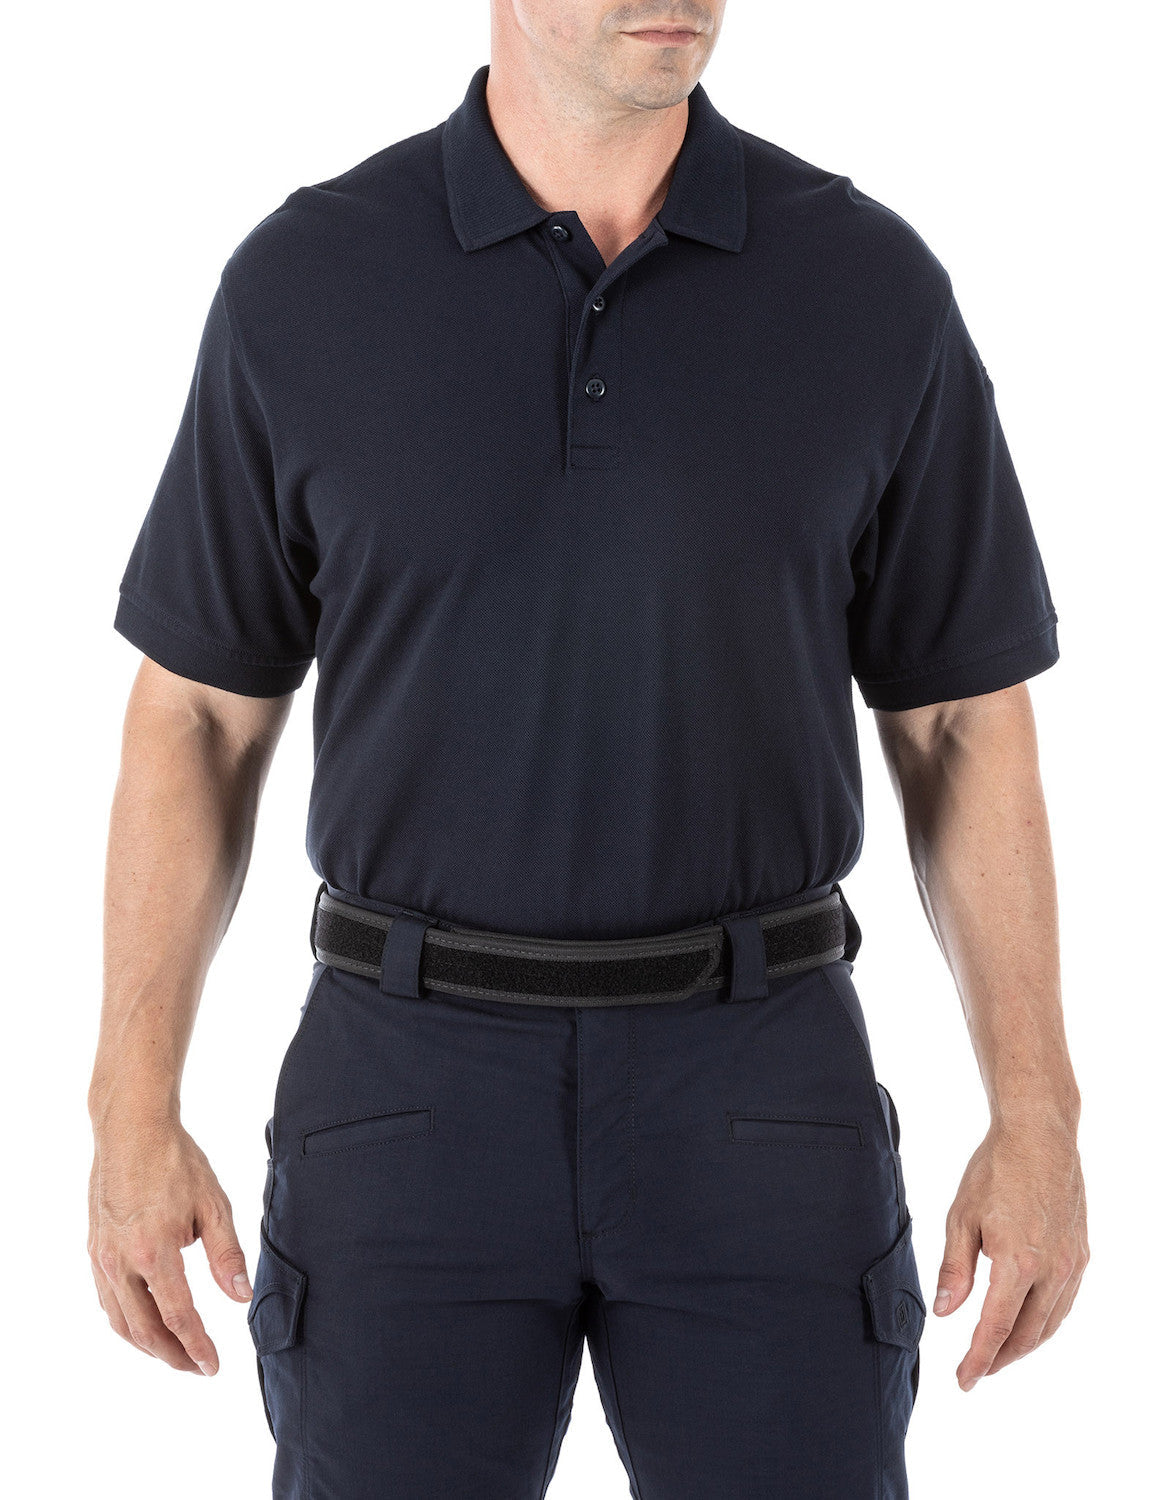 Pflugerville | Tactical Professional Short Sleeve Polo (41060) | The Fire Center | The Fire Store | Store | Fuego Fire Center | 5.11’s Professional Short Sleeve Polo is made of durable, soft 100% cotton pique knit that’s treated to retain color. The Professional Short Sleeve Polo features a stay-flat, no-roll collar, pen pockets on the sleeve, and shrink, wrinkle, and fade-resistance fabric.